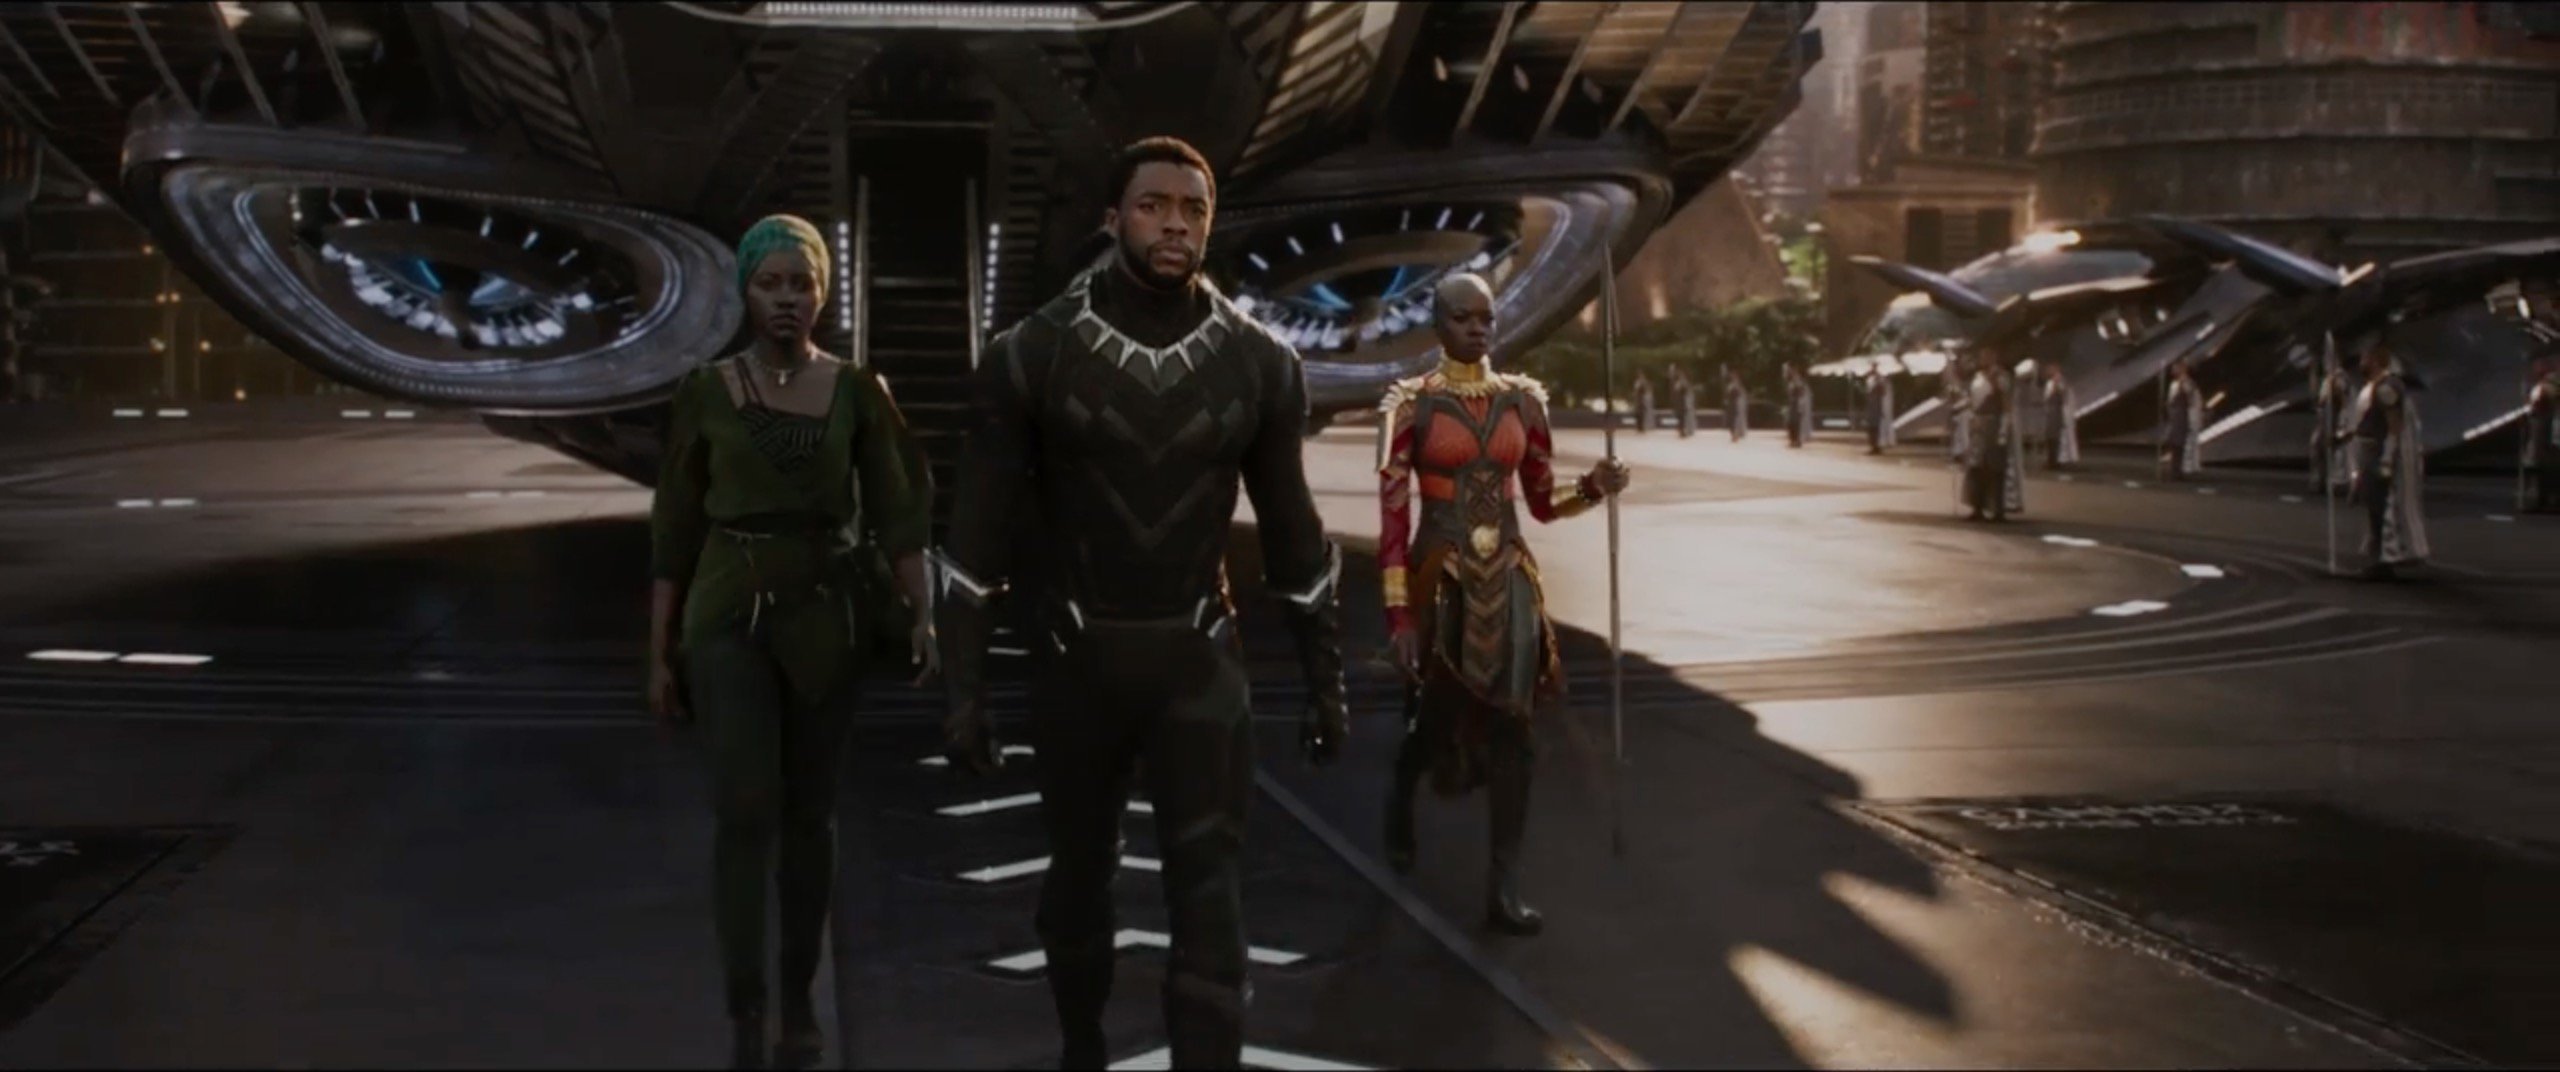 black panther official trailer